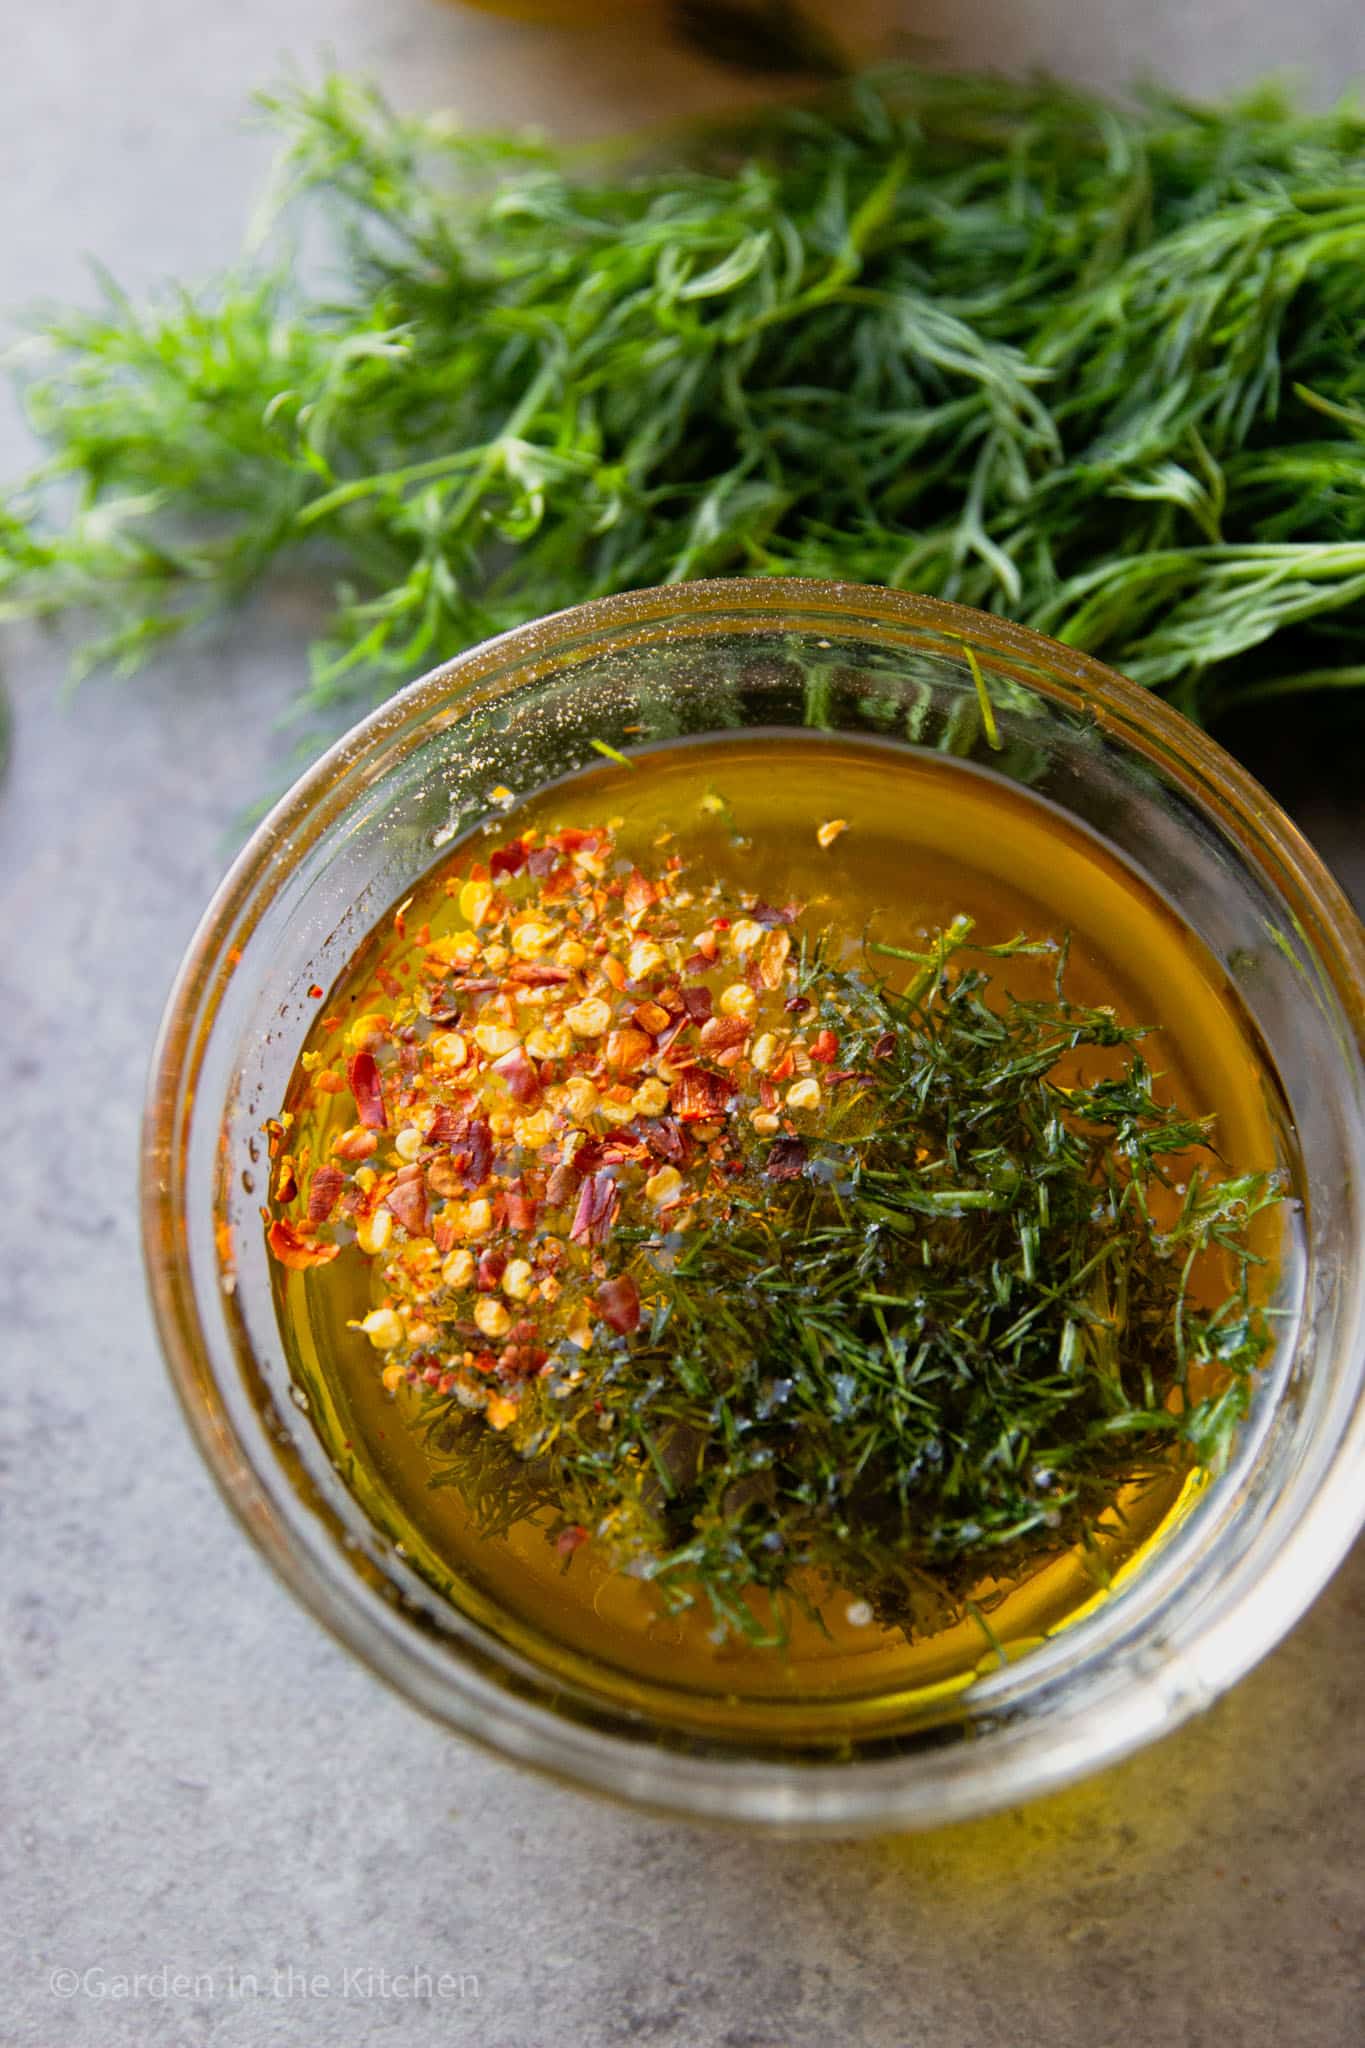 dill and red chili flakes in a glass bowl with olive oil and lemon juice.